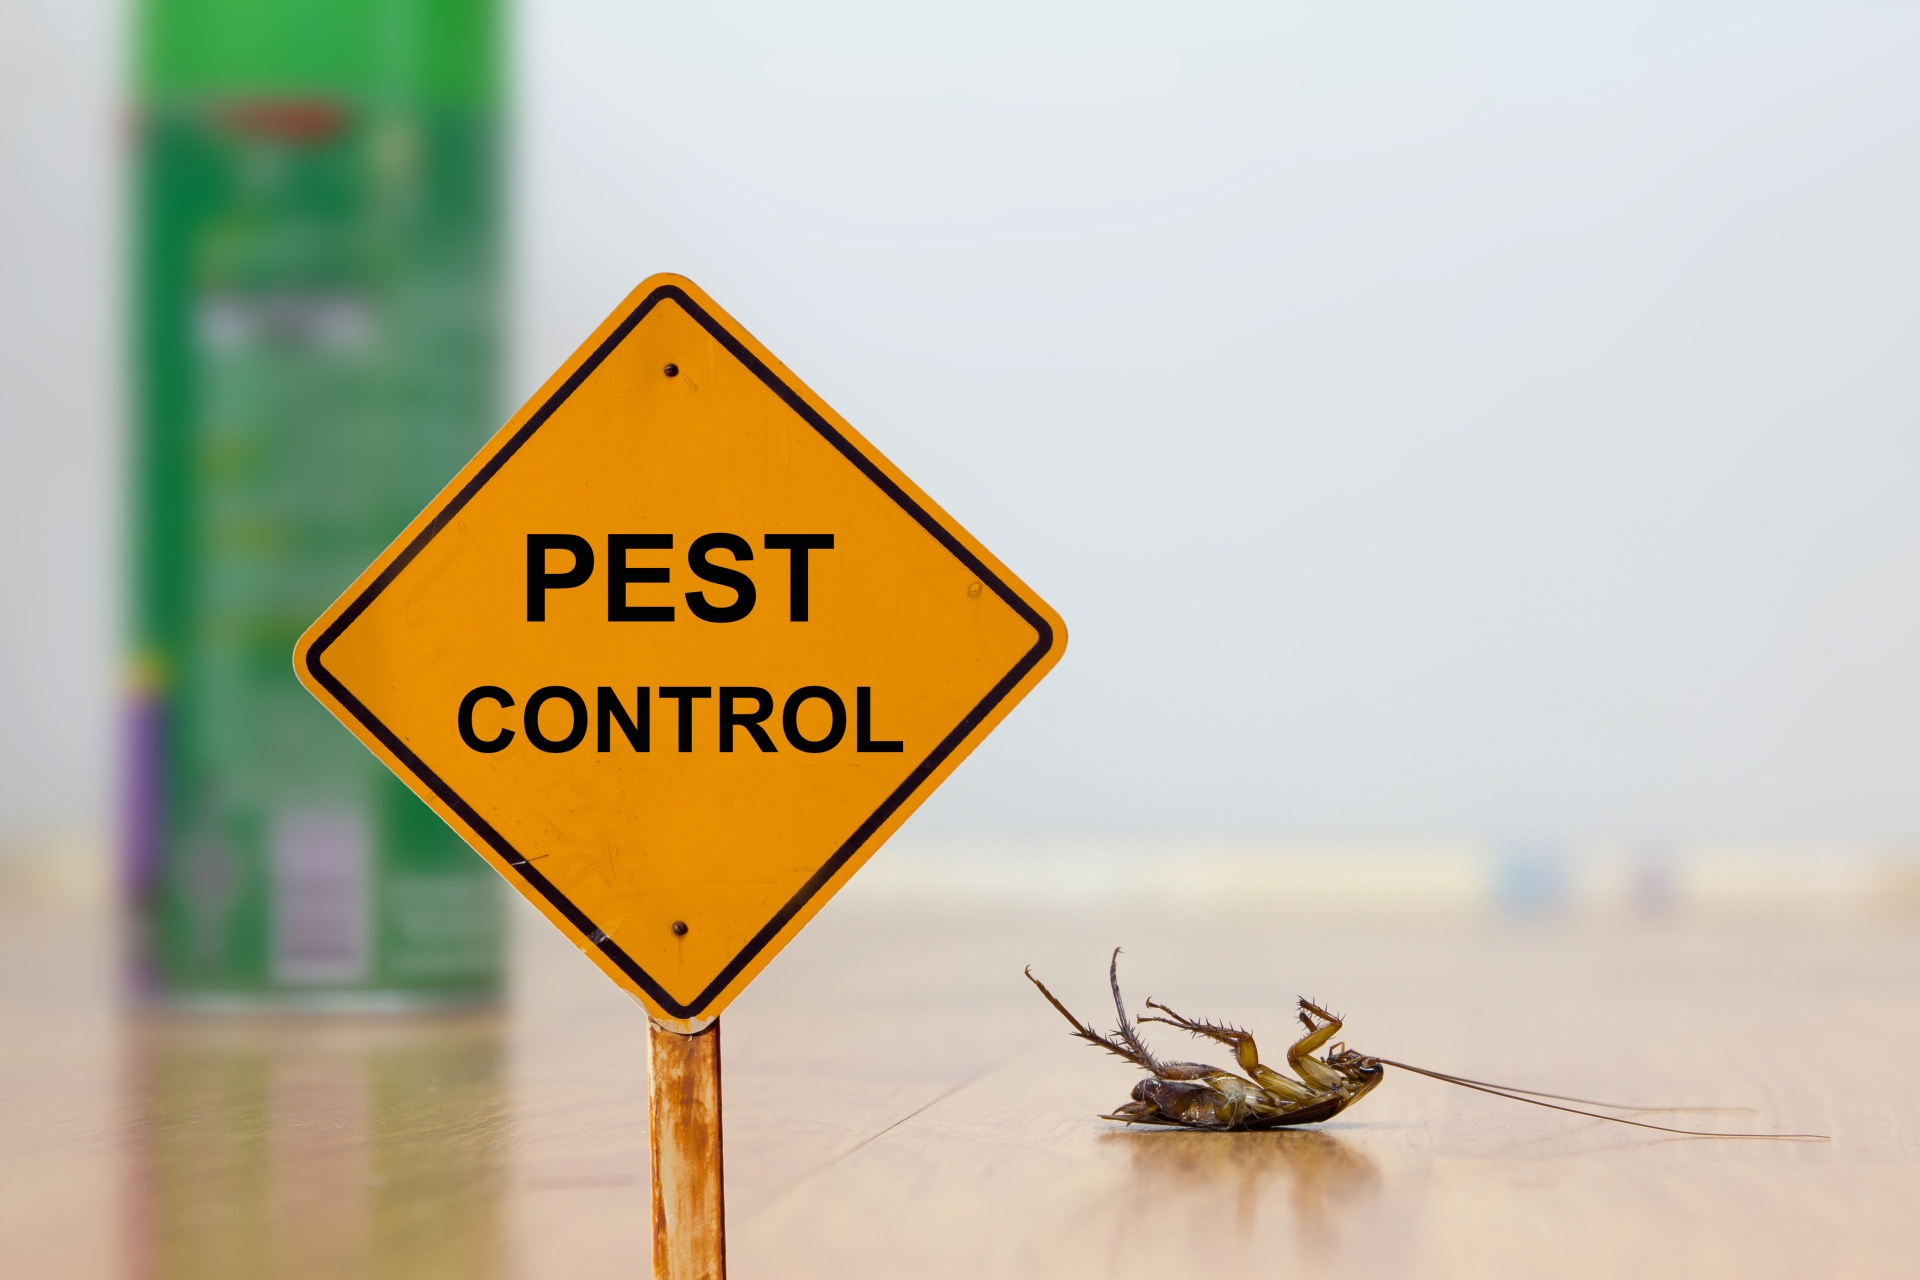 24 Hour Pest Control, Pest Control in Seven Sisters, N15. Call Now 020 8166 9746